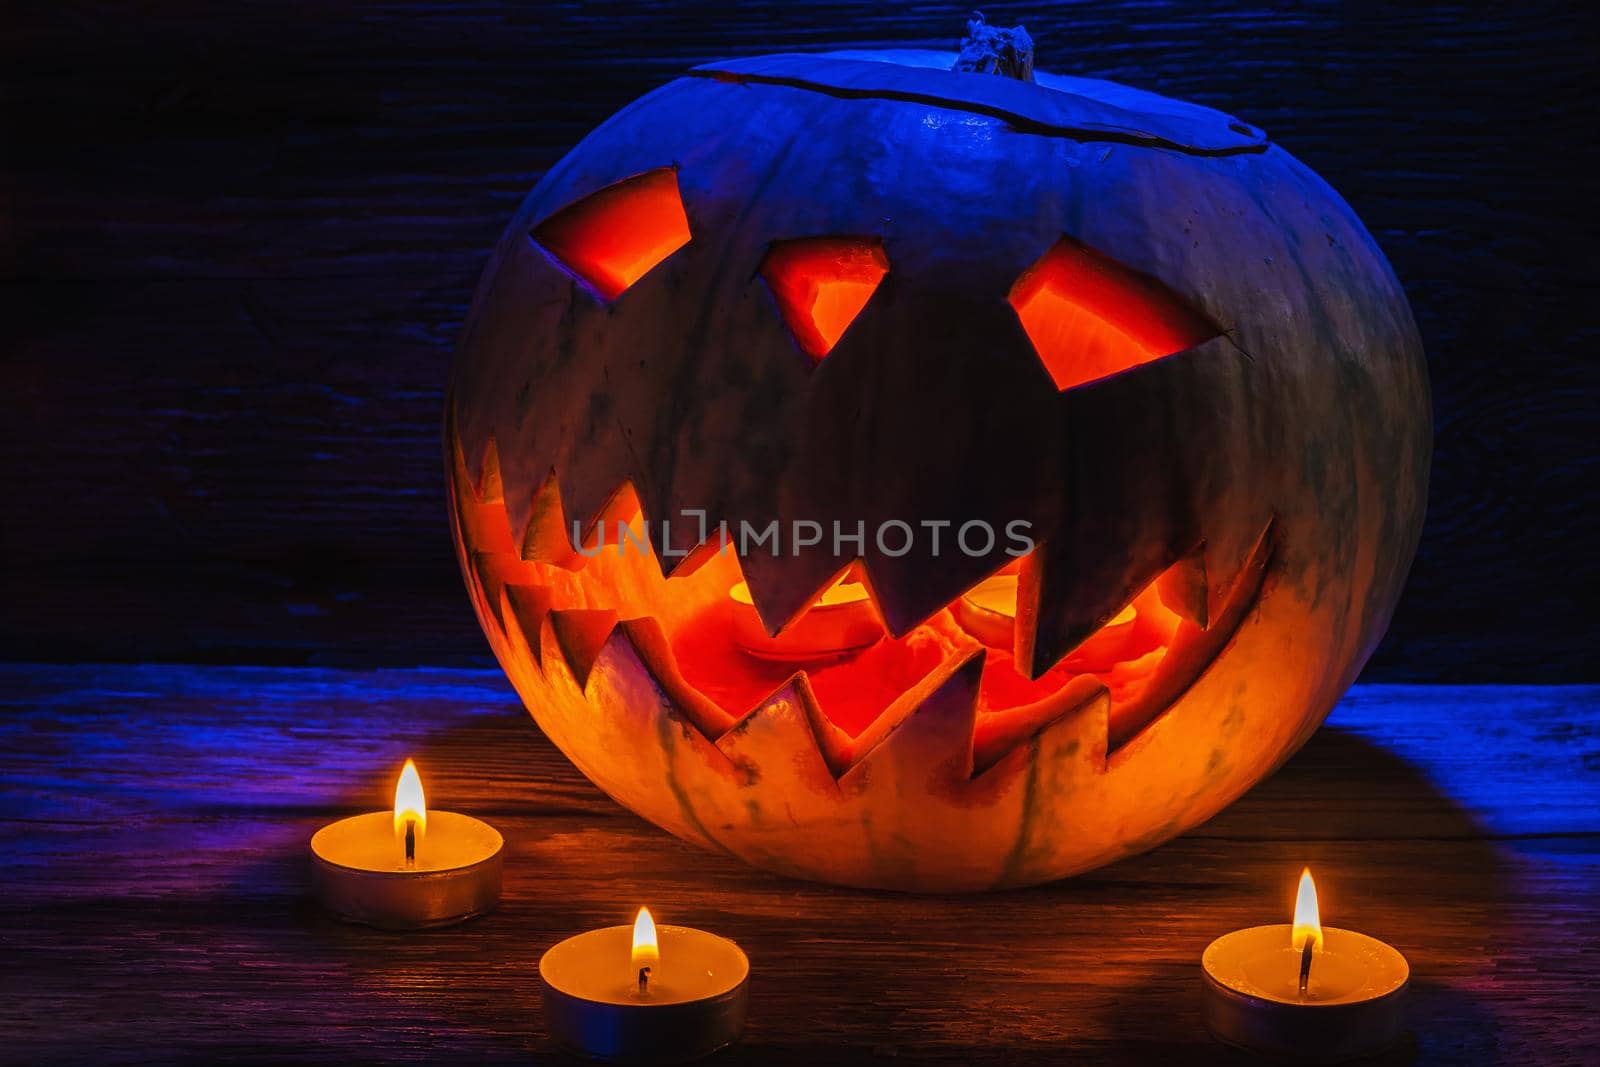 Jack O' Lantern Glowing In Fantasy Night. Halloween. candles are burning nearby. On old wooden background. dramatic frame. horizontal orientation